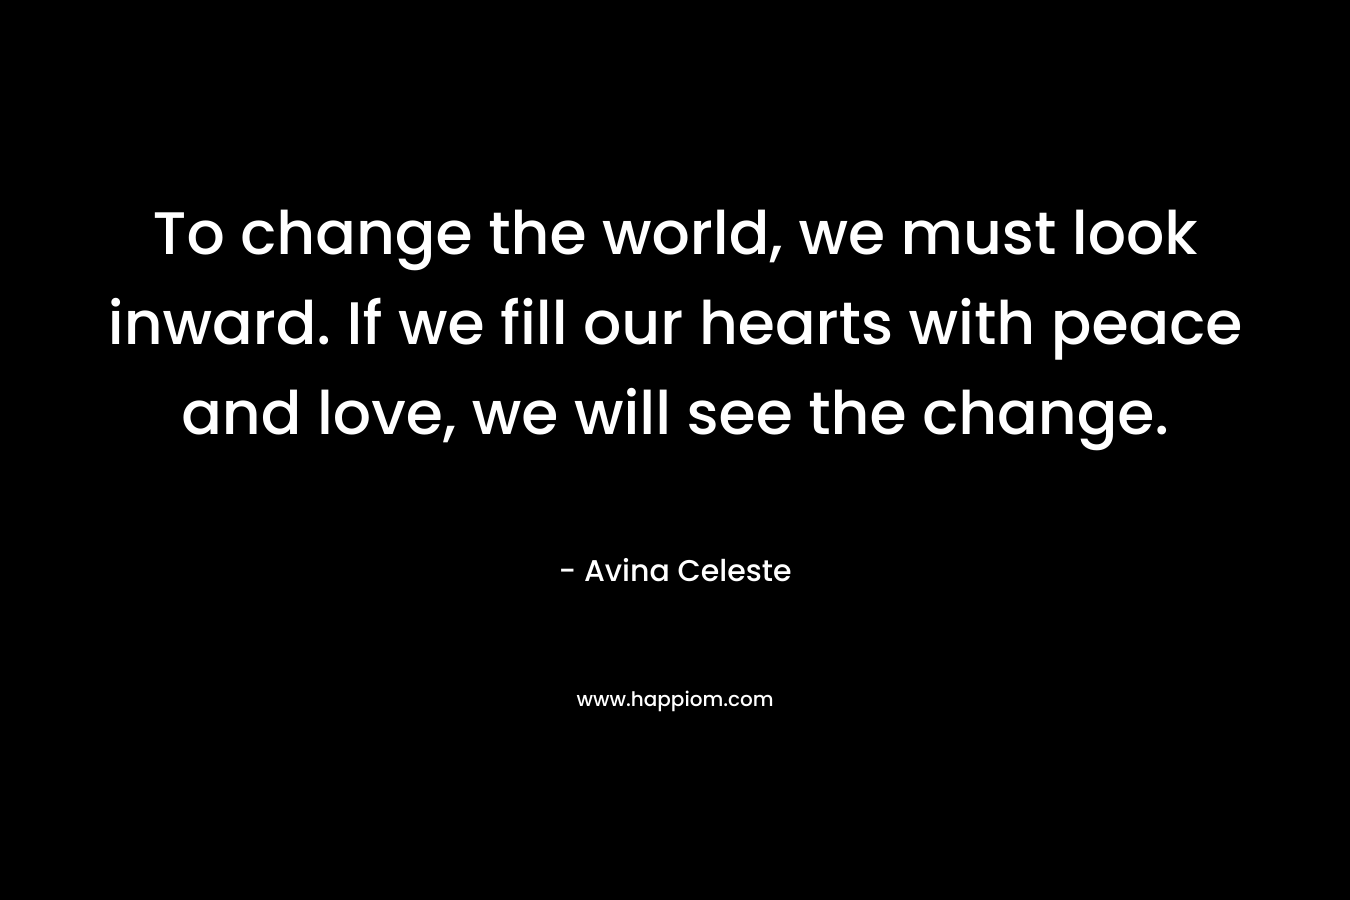 To change the world, we must look inward. If we fill our hearts with peace and love, we will see the change.